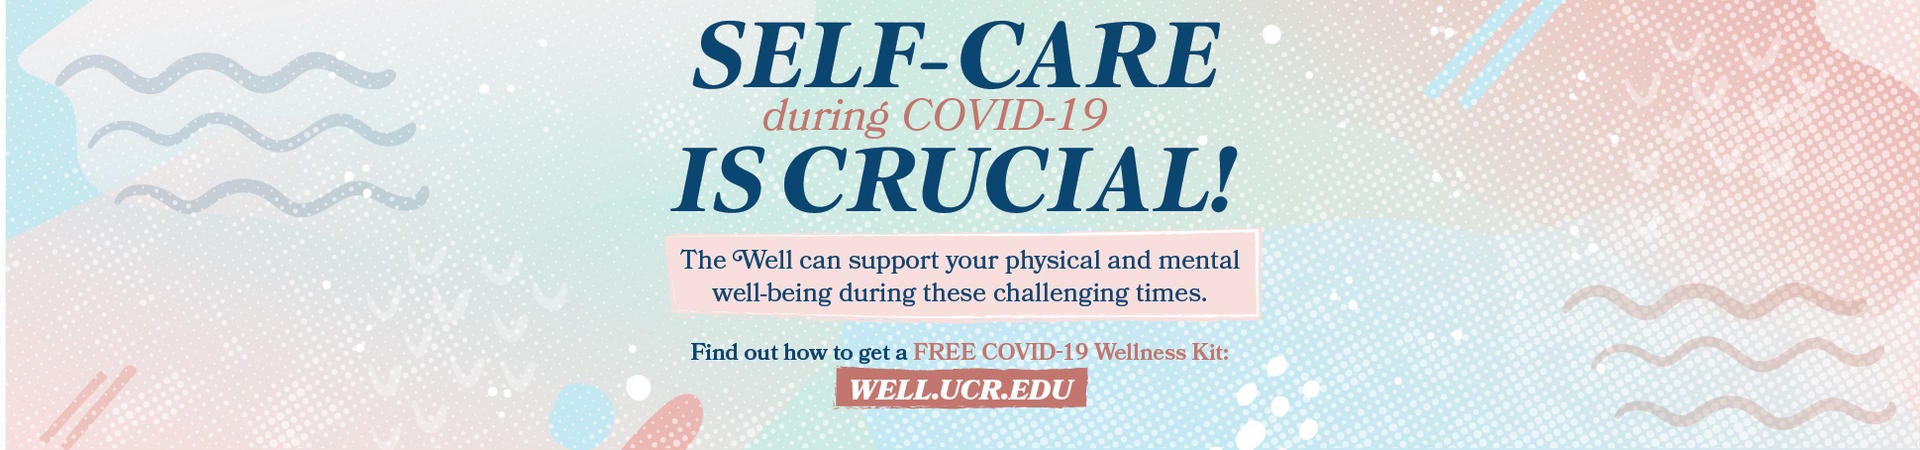 Self-Care during Covid-19 is Crucial!